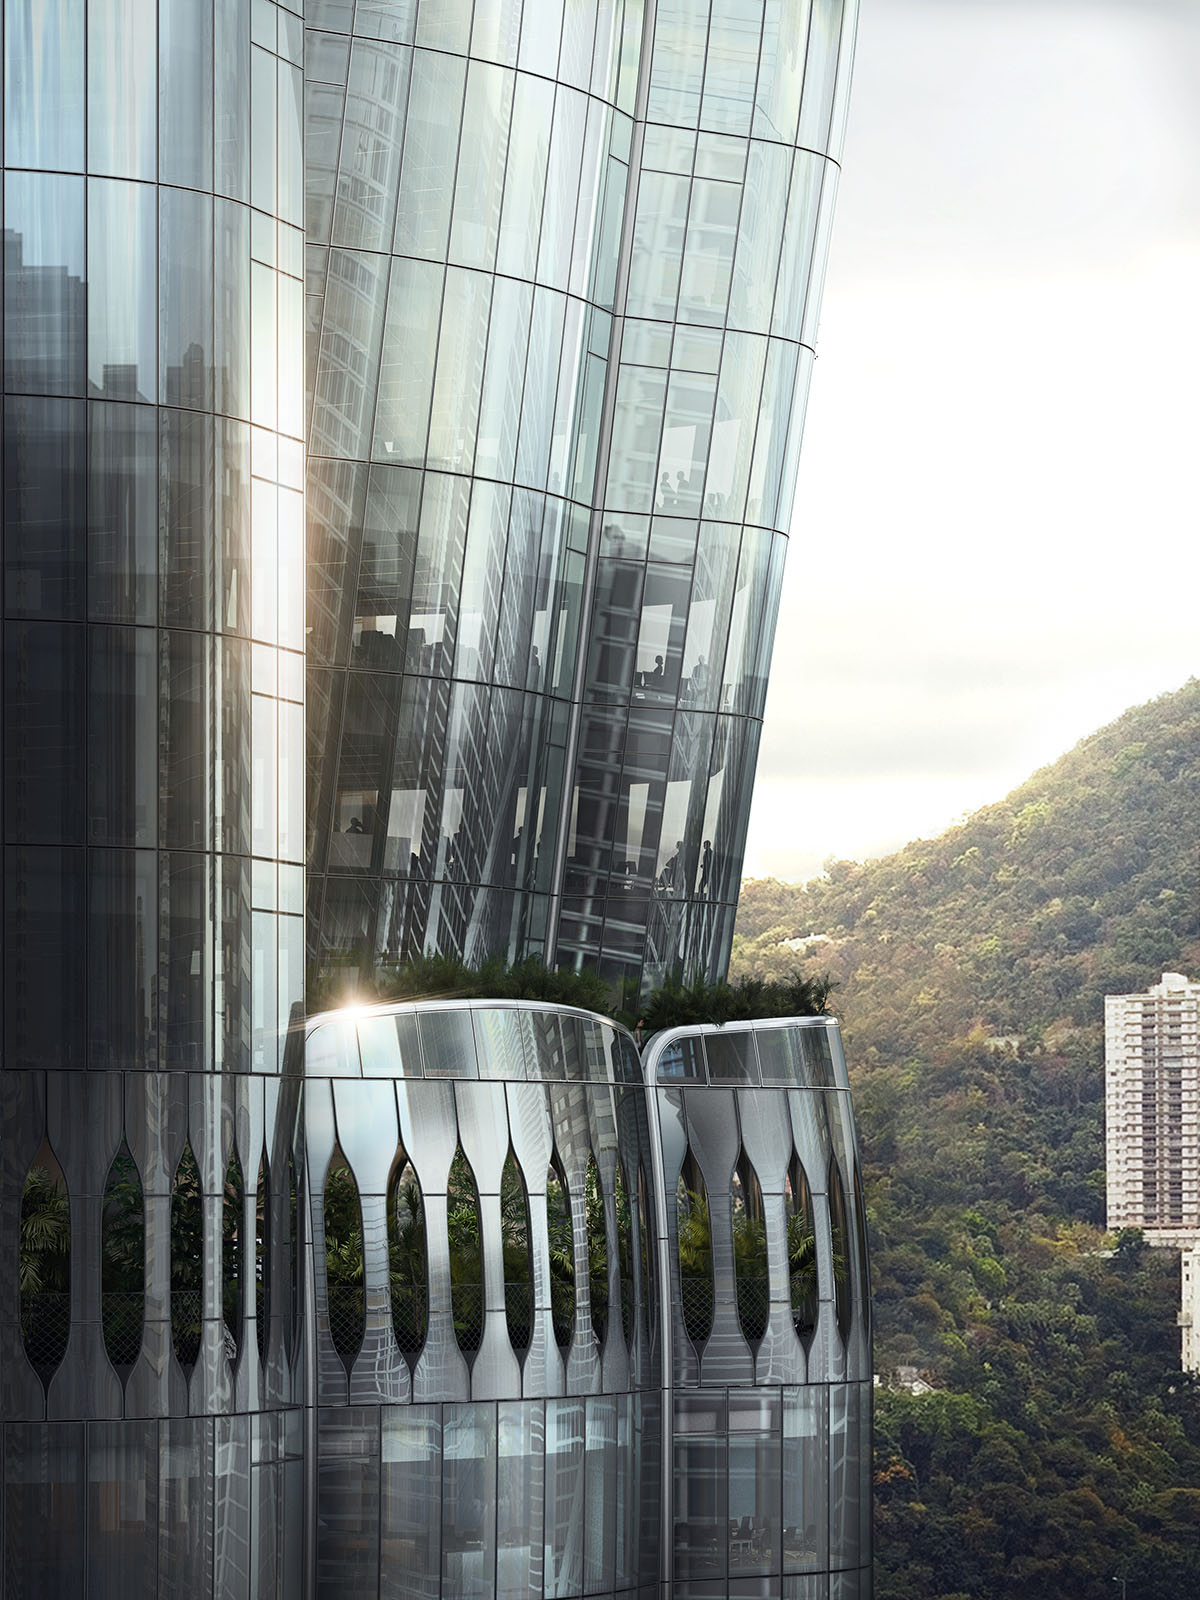 Zaha Hadid Architects Designs New High Rise With Curved Glass Façade In Hong Kongs Business 3849